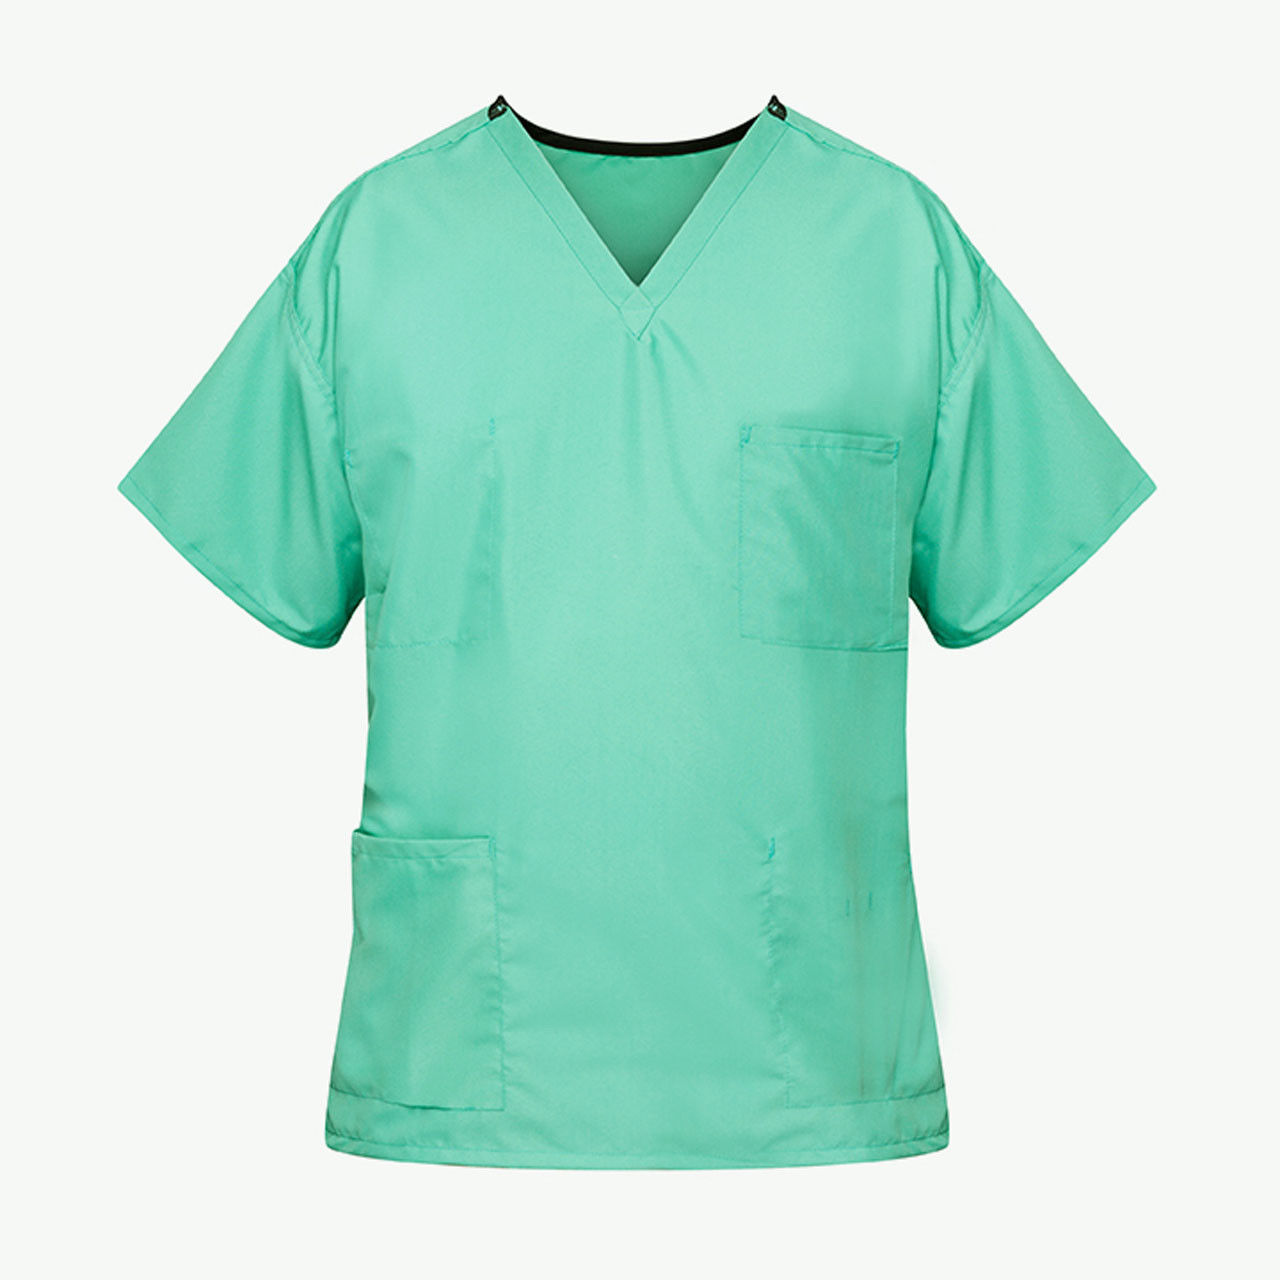 What color are these jade green scrubs?